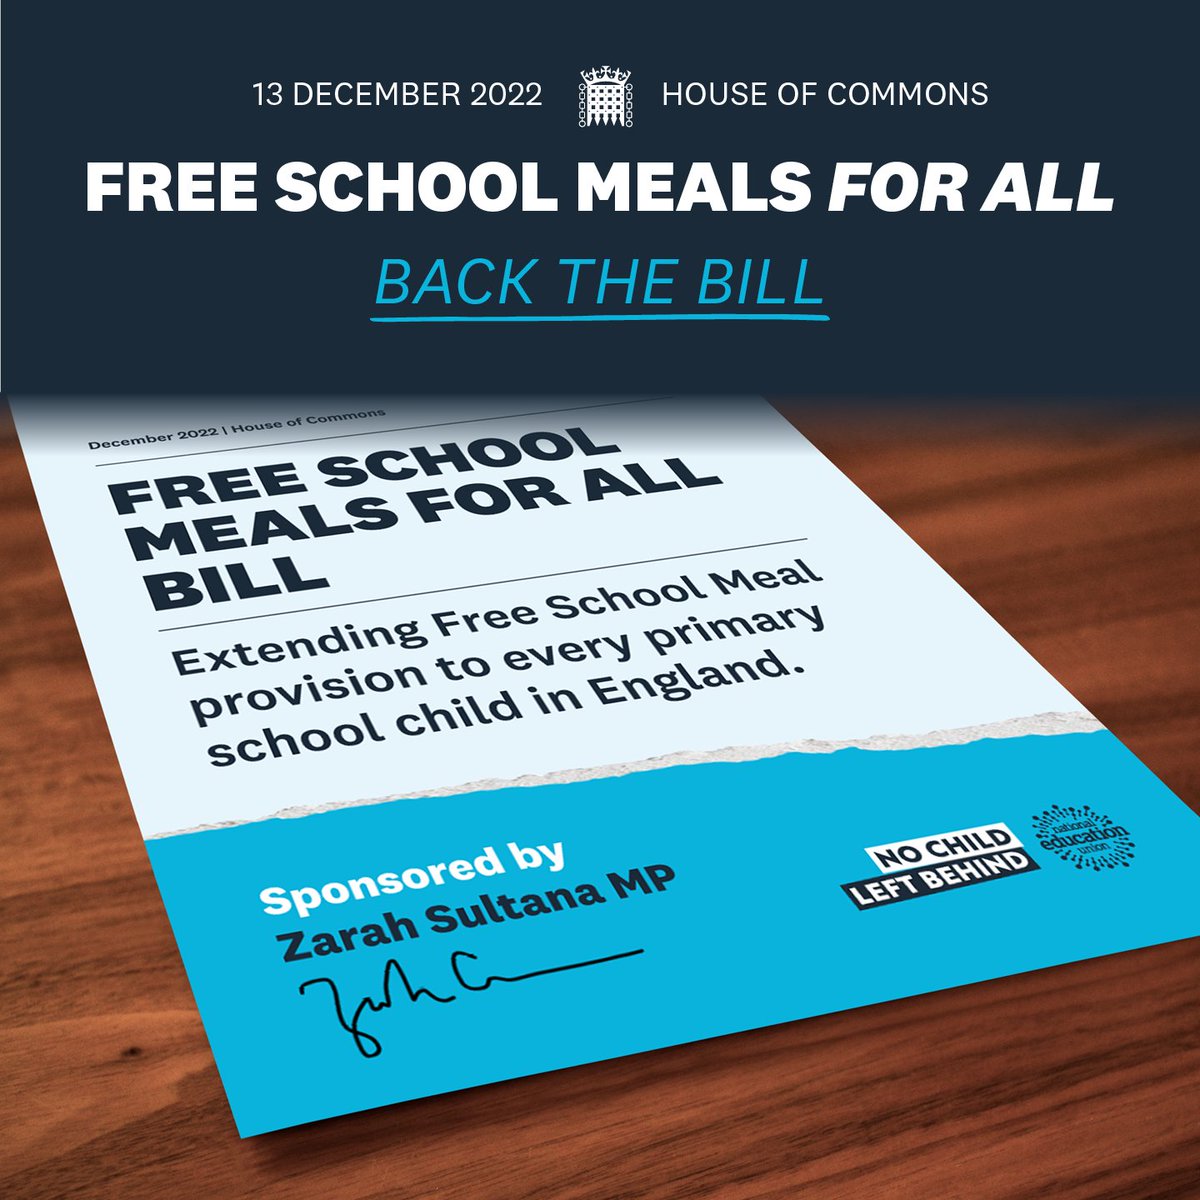 Next week I am proposing the Free School Meal for All Bill in Parliament.
 
The Bill would extend free school meals to all primary school children, tackling the injustice of millions of kids going hungry.
 
Together, we can end child food poverty. #FreeSchoolMealsForAll